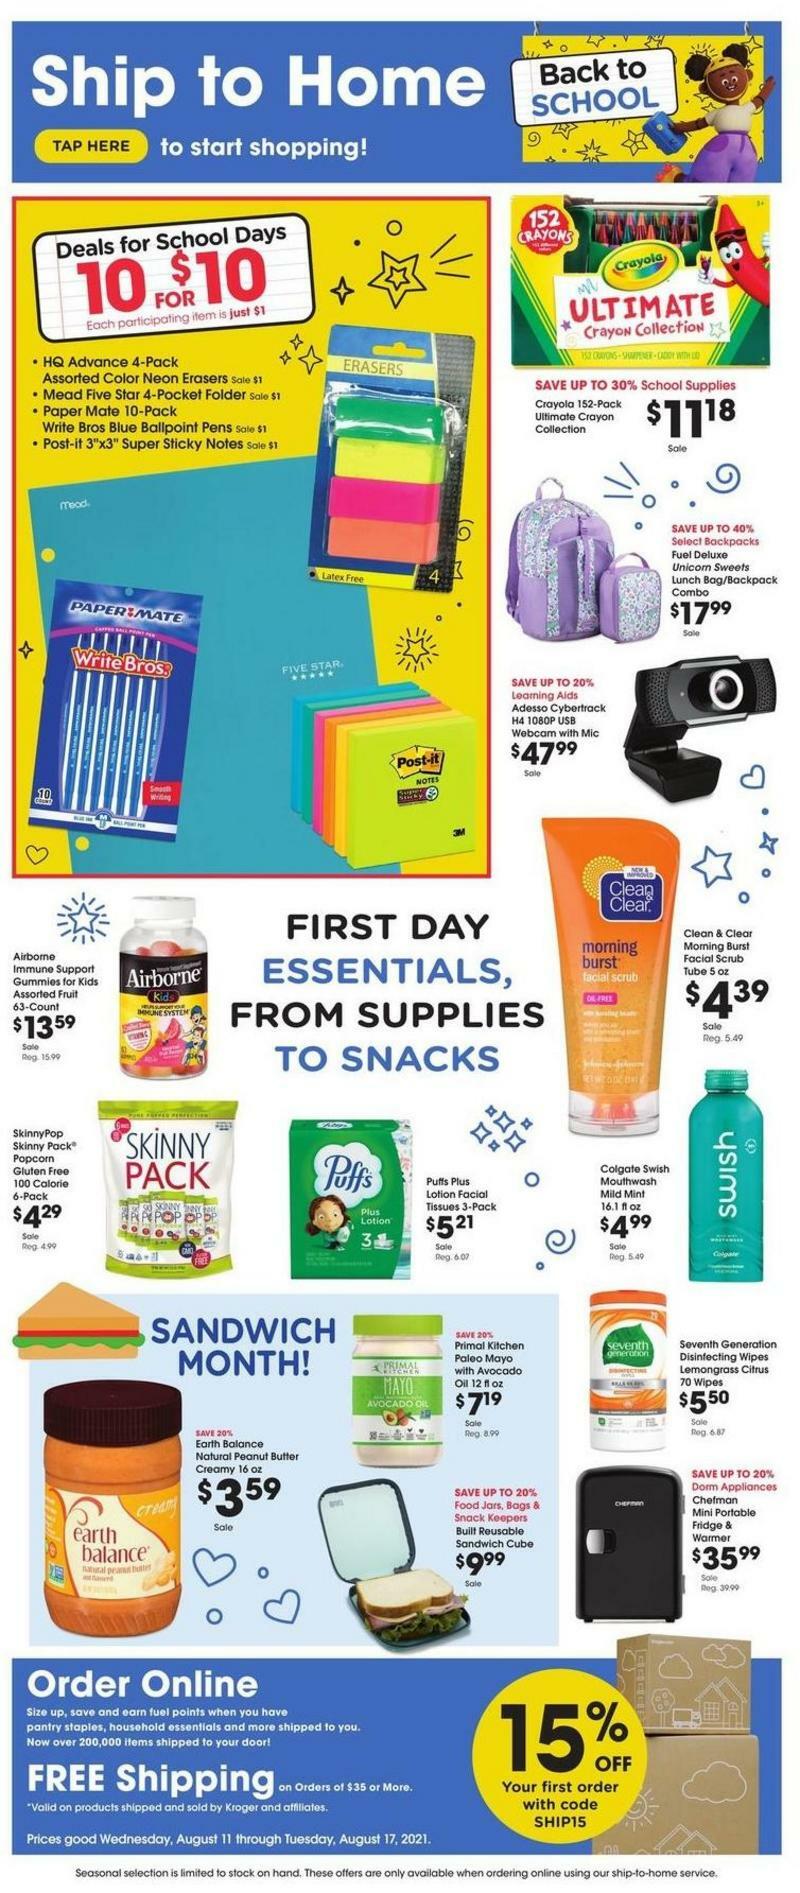 Fred Meyer Ship to Home Weekly Ad from August 11